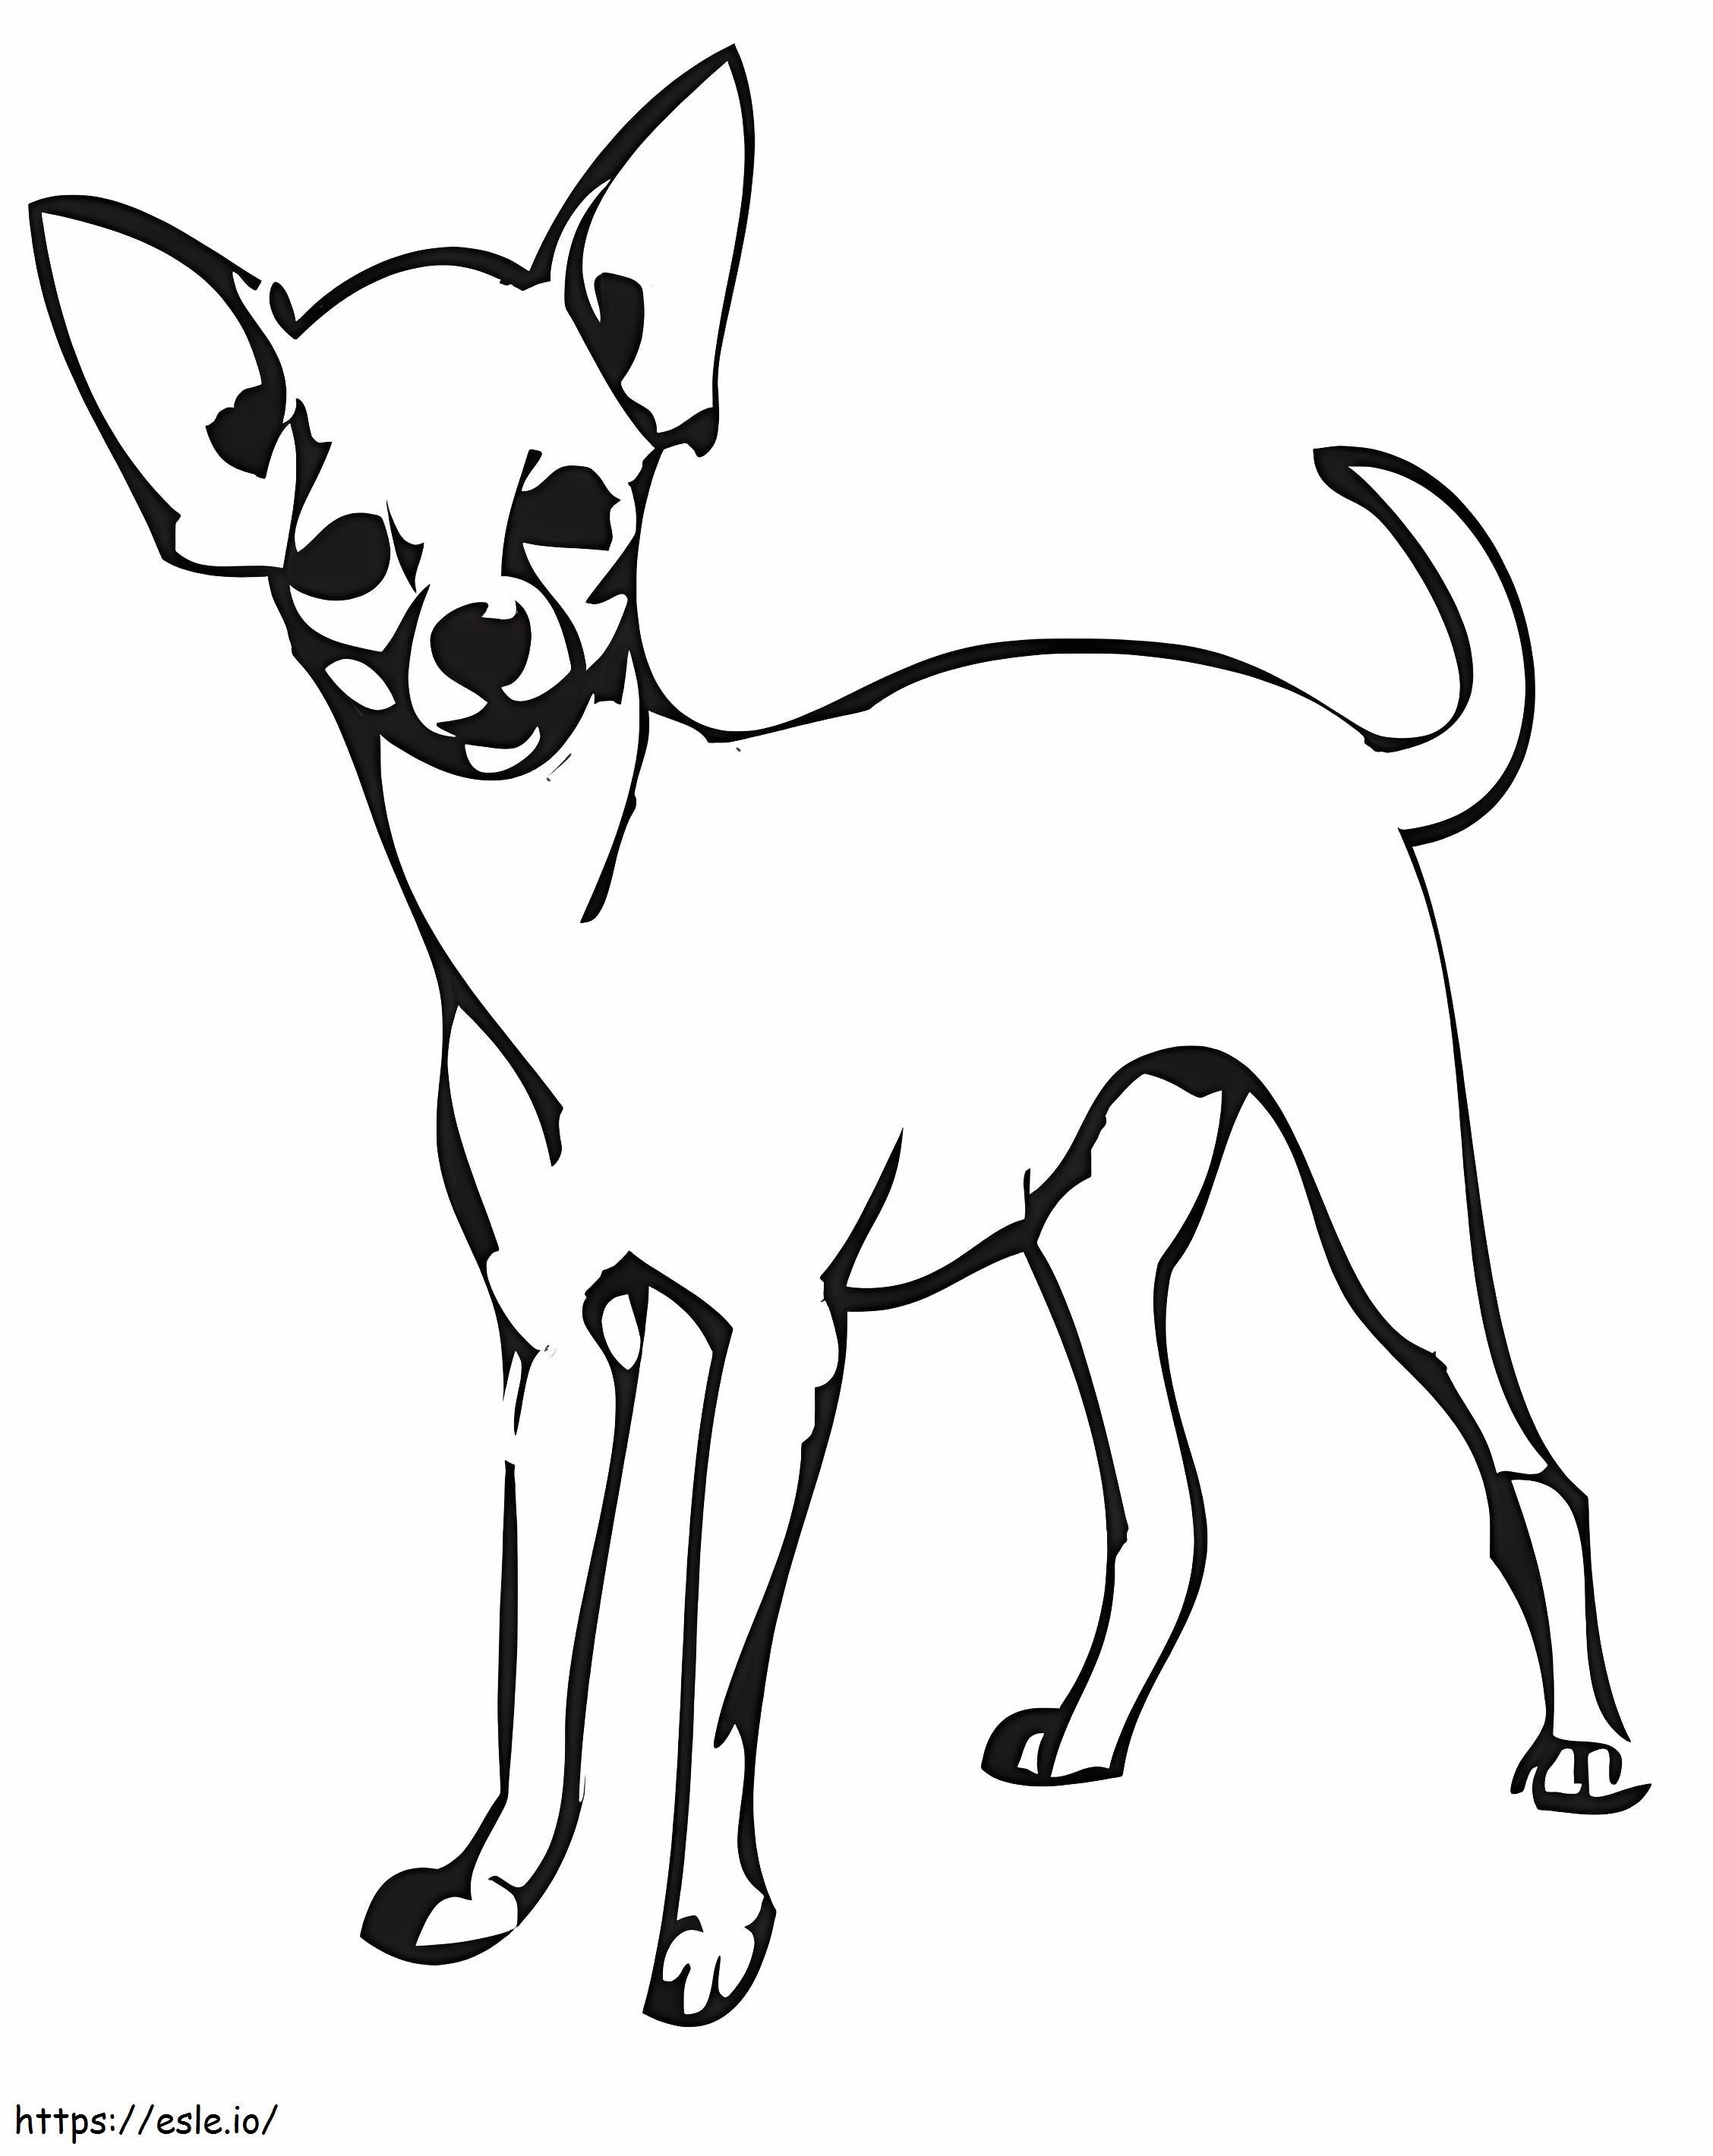 A Chihuahua Dog coloring page